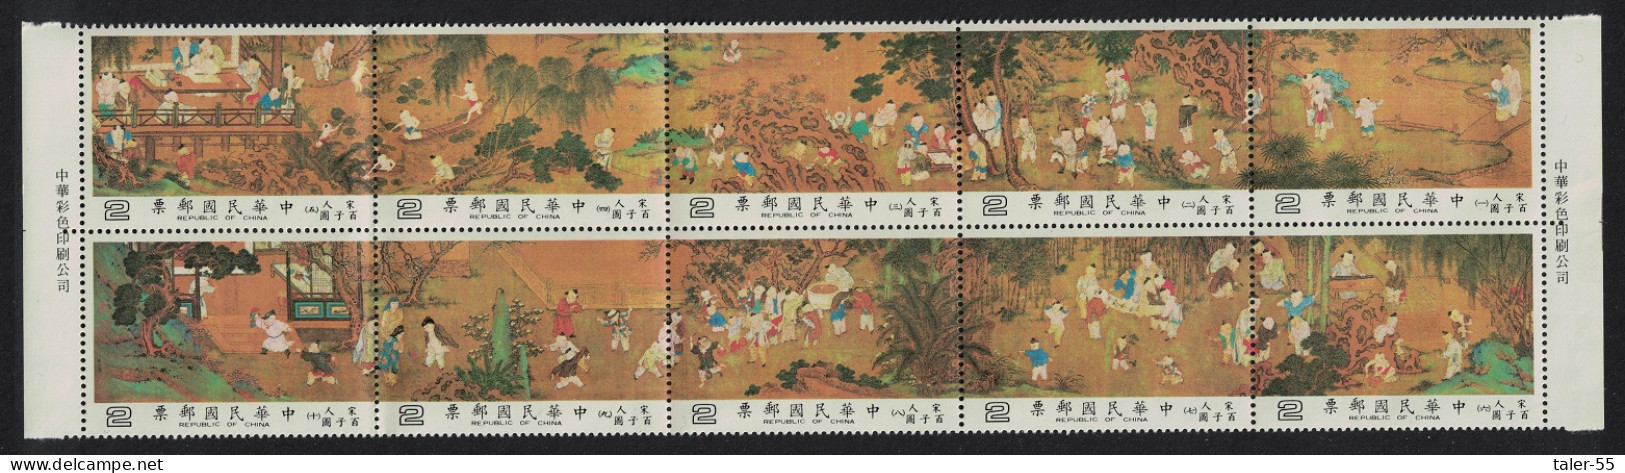 Taiwan Sung Dynasty Painting 'One Hundred Young Boys' 10v T2 1981 MNH SG#1403-1412 - Neufs